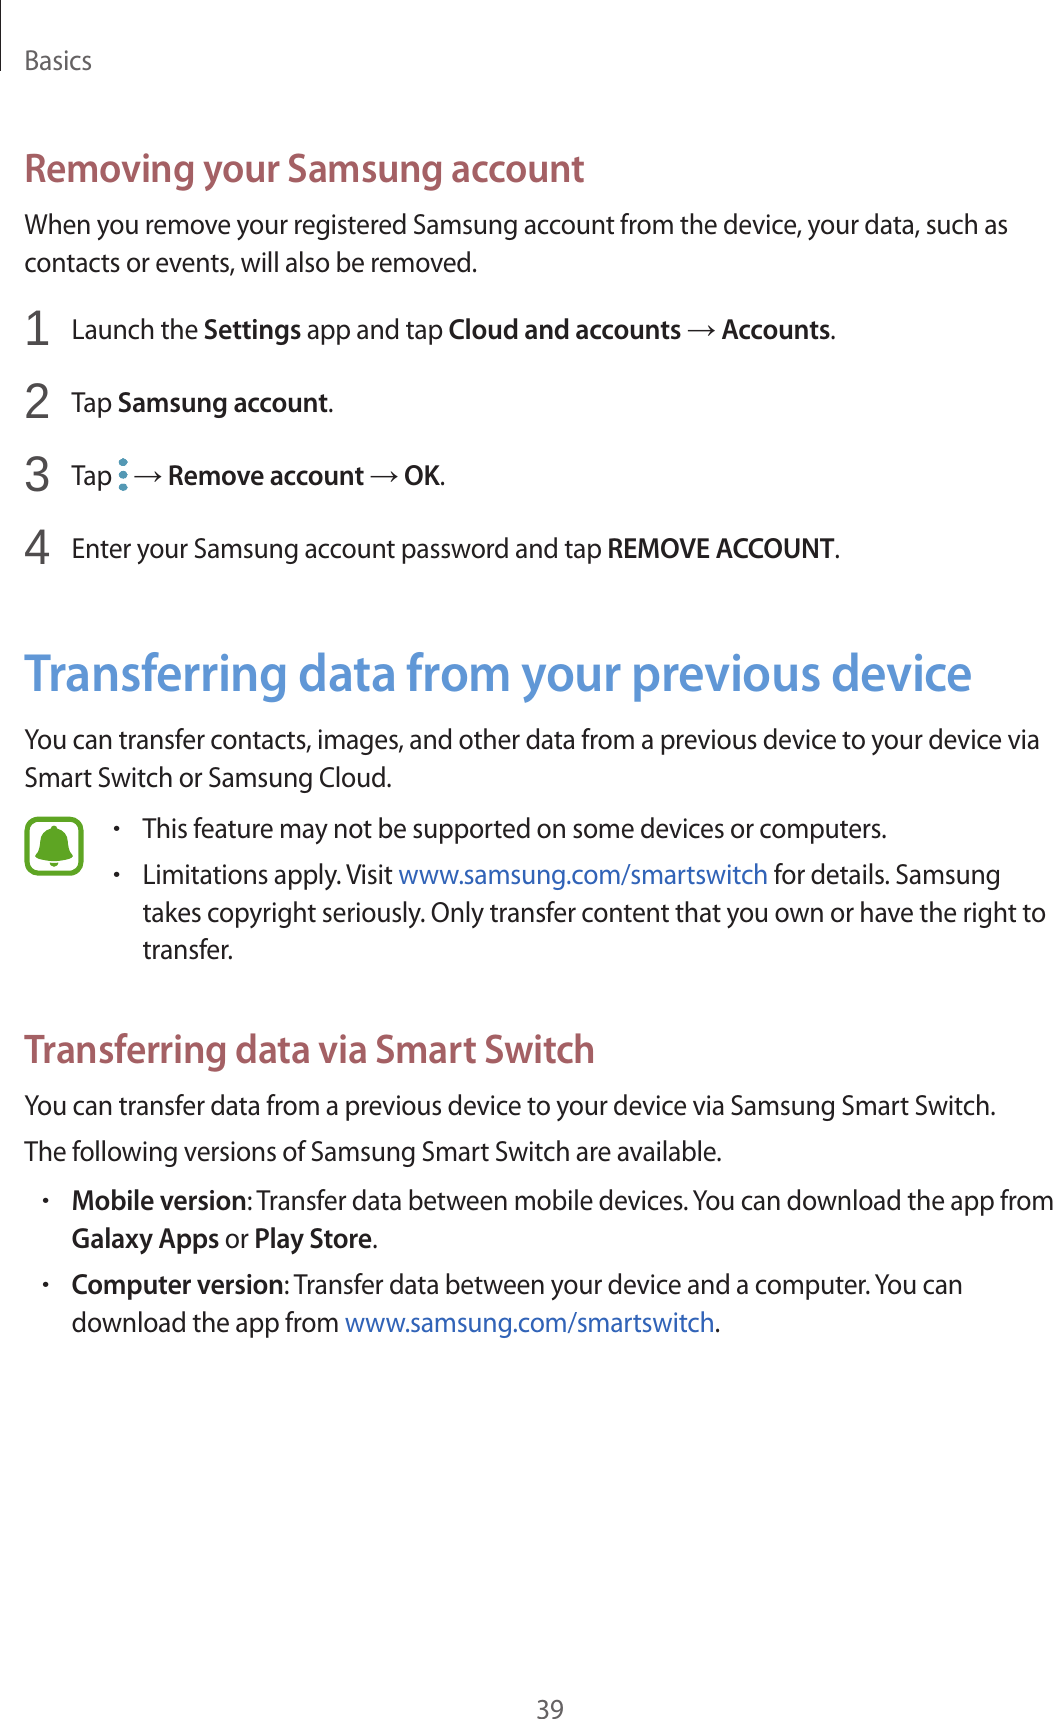 Basics39Removing your Samsung accountWhen you remove your registered Samsung account from the device, your data, such as contacts or events, will also be removed.1  Launch the Settings app and tap Cloud and accounts → Accounts.2  Tap Samsung account.3  Tap   → Remove account → OK.4  Enter your Samsung account password and tap REMOVE ACCOUNT.Transferring data from your previous deviceYou can transfer contacts, images, and other data from a previous device to your device via Smart Switch or Samsung Cloud.•This feature may not be supported on some devices or computers.•Limitations apply. Visit www.samsung.com/smartswitch for details. Samsung takes copyright seriously. Only transfer content that you own or have the right to transfer.Transferring data via Smart SwitchYou can transfer data from a previous device to your device via Samsung Smart Switch.The following versions of Samsung Smart Switch are available.•Mobile version: Transfer data between mobile devices. You can download the app from Galaxy Apps or Play Store.•Computer version: Transfer data between your device and a computer. You can download the app from www.samsung.com/smartswitch.